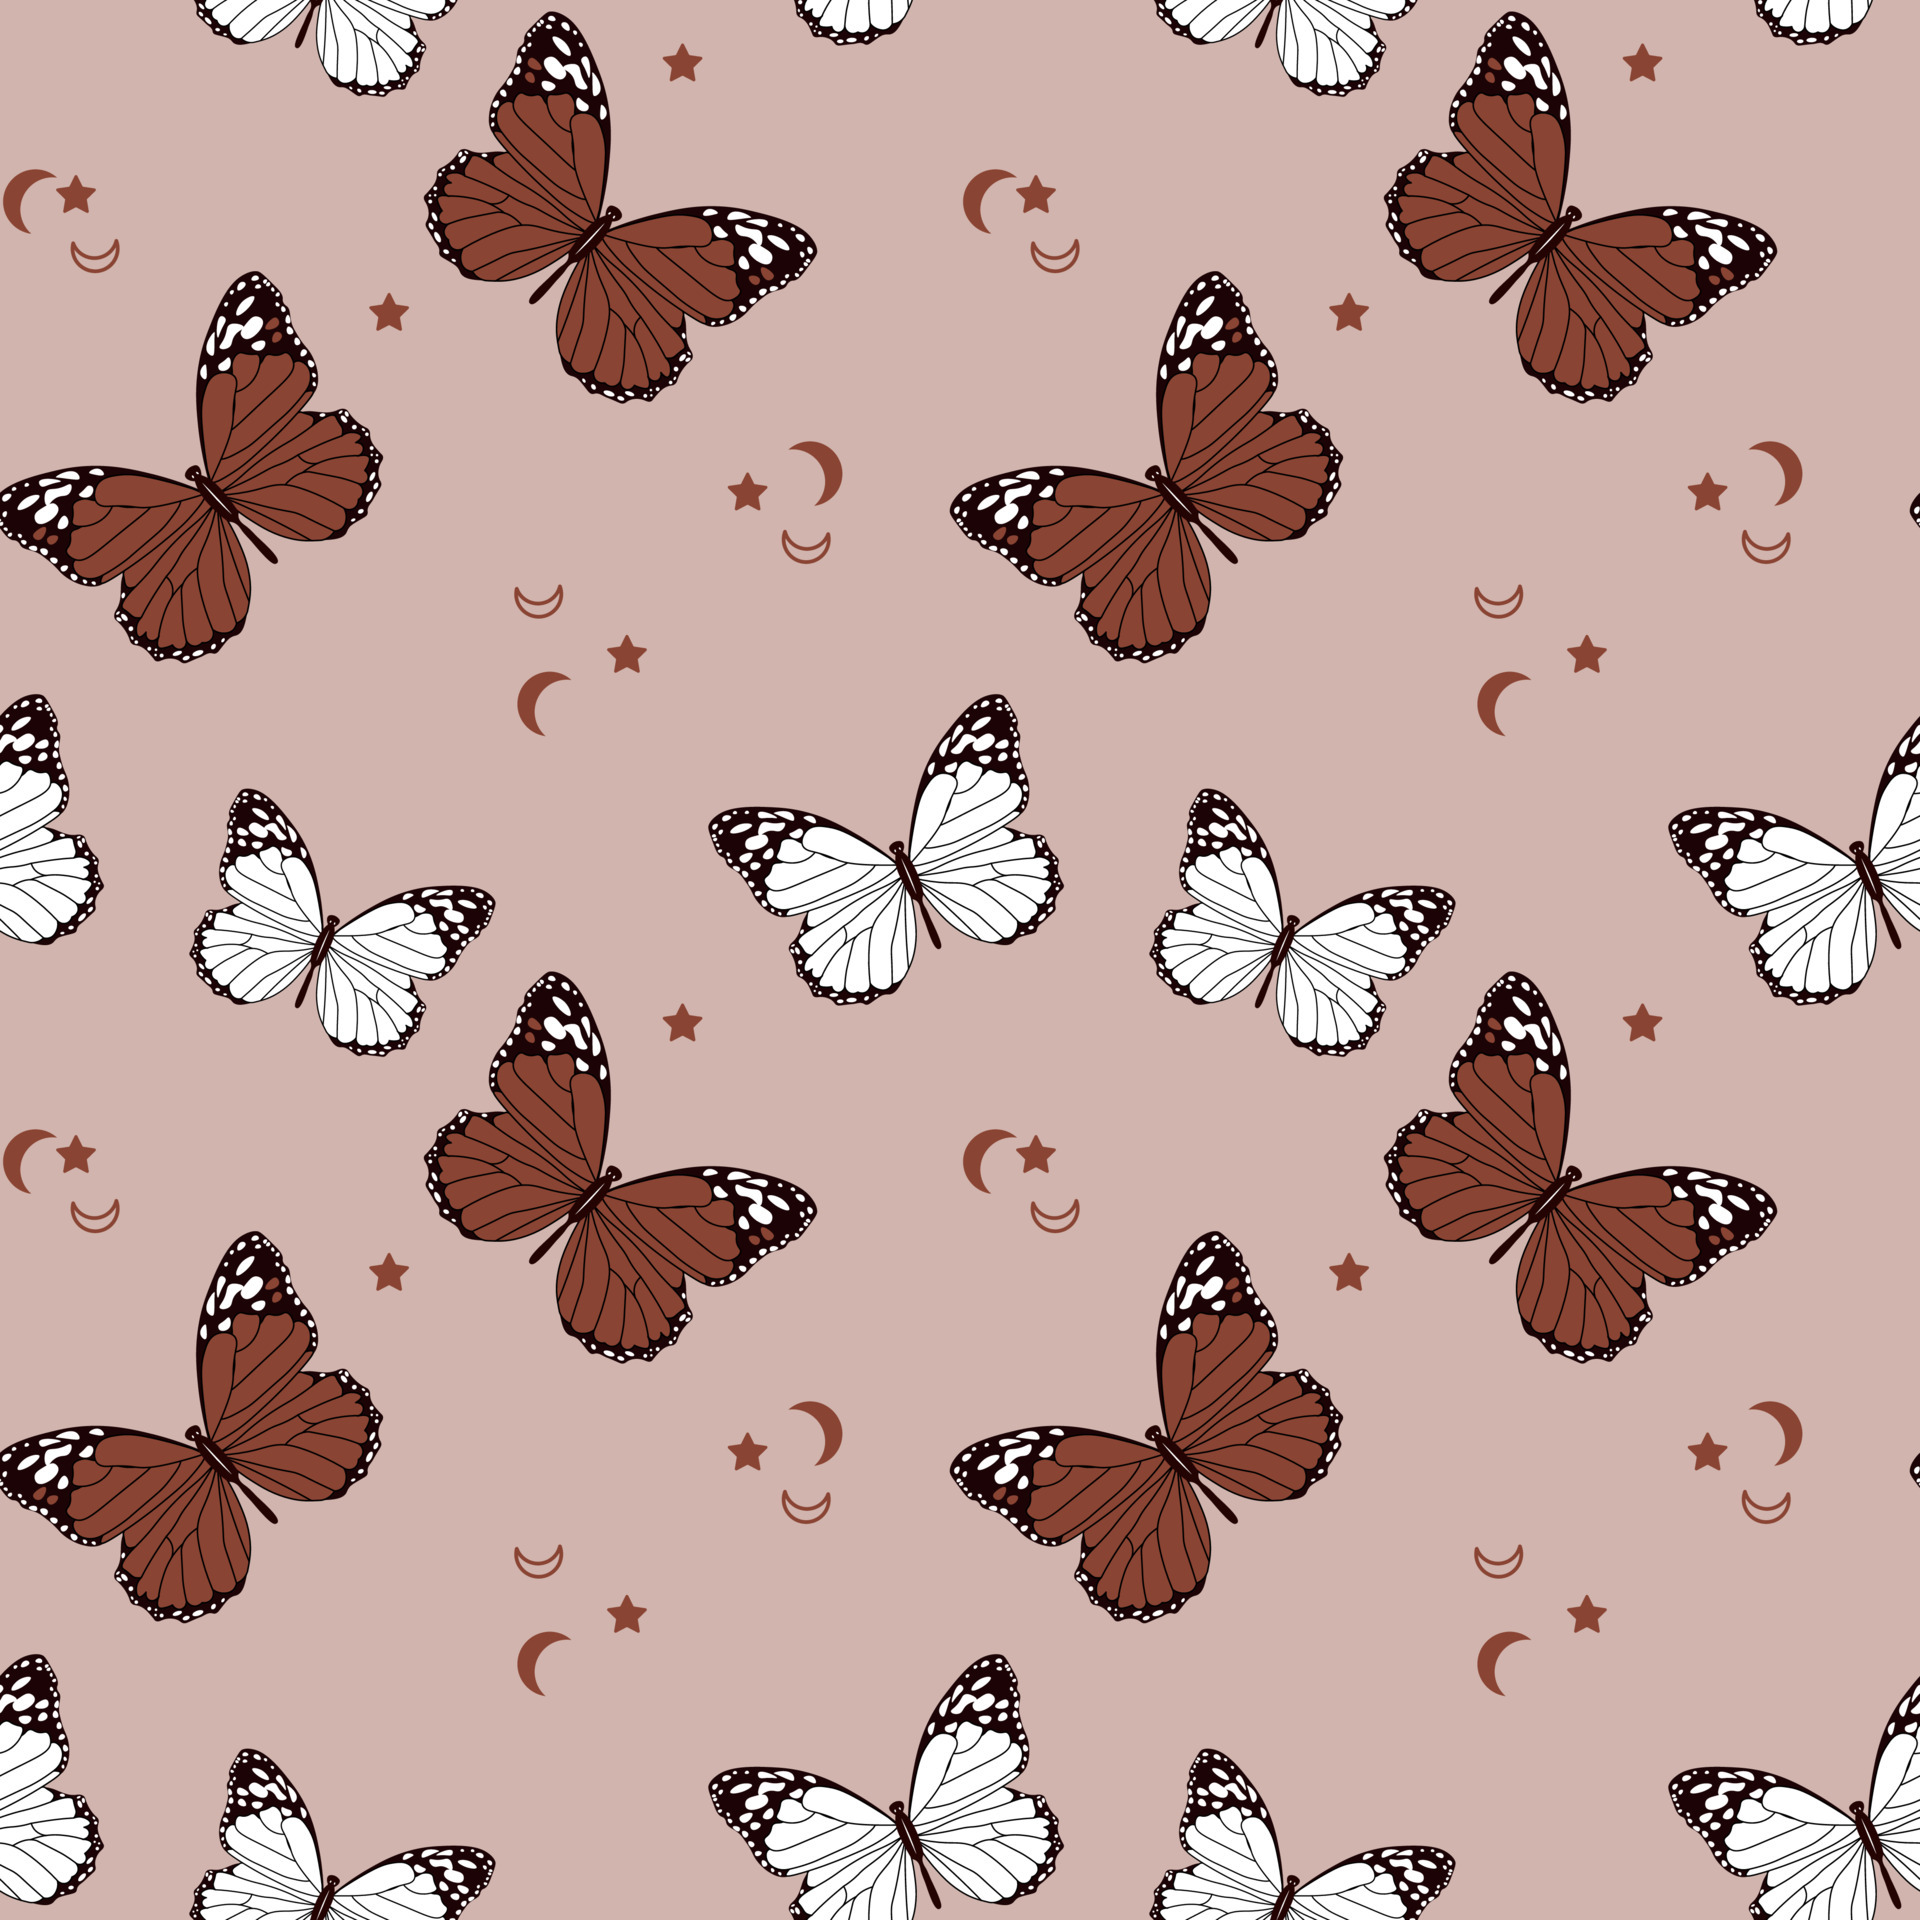 Seamless pattern, painted white and brown butterflies, moon and stars on a beige background. Print, wallpaper, textiles, bedroom decor